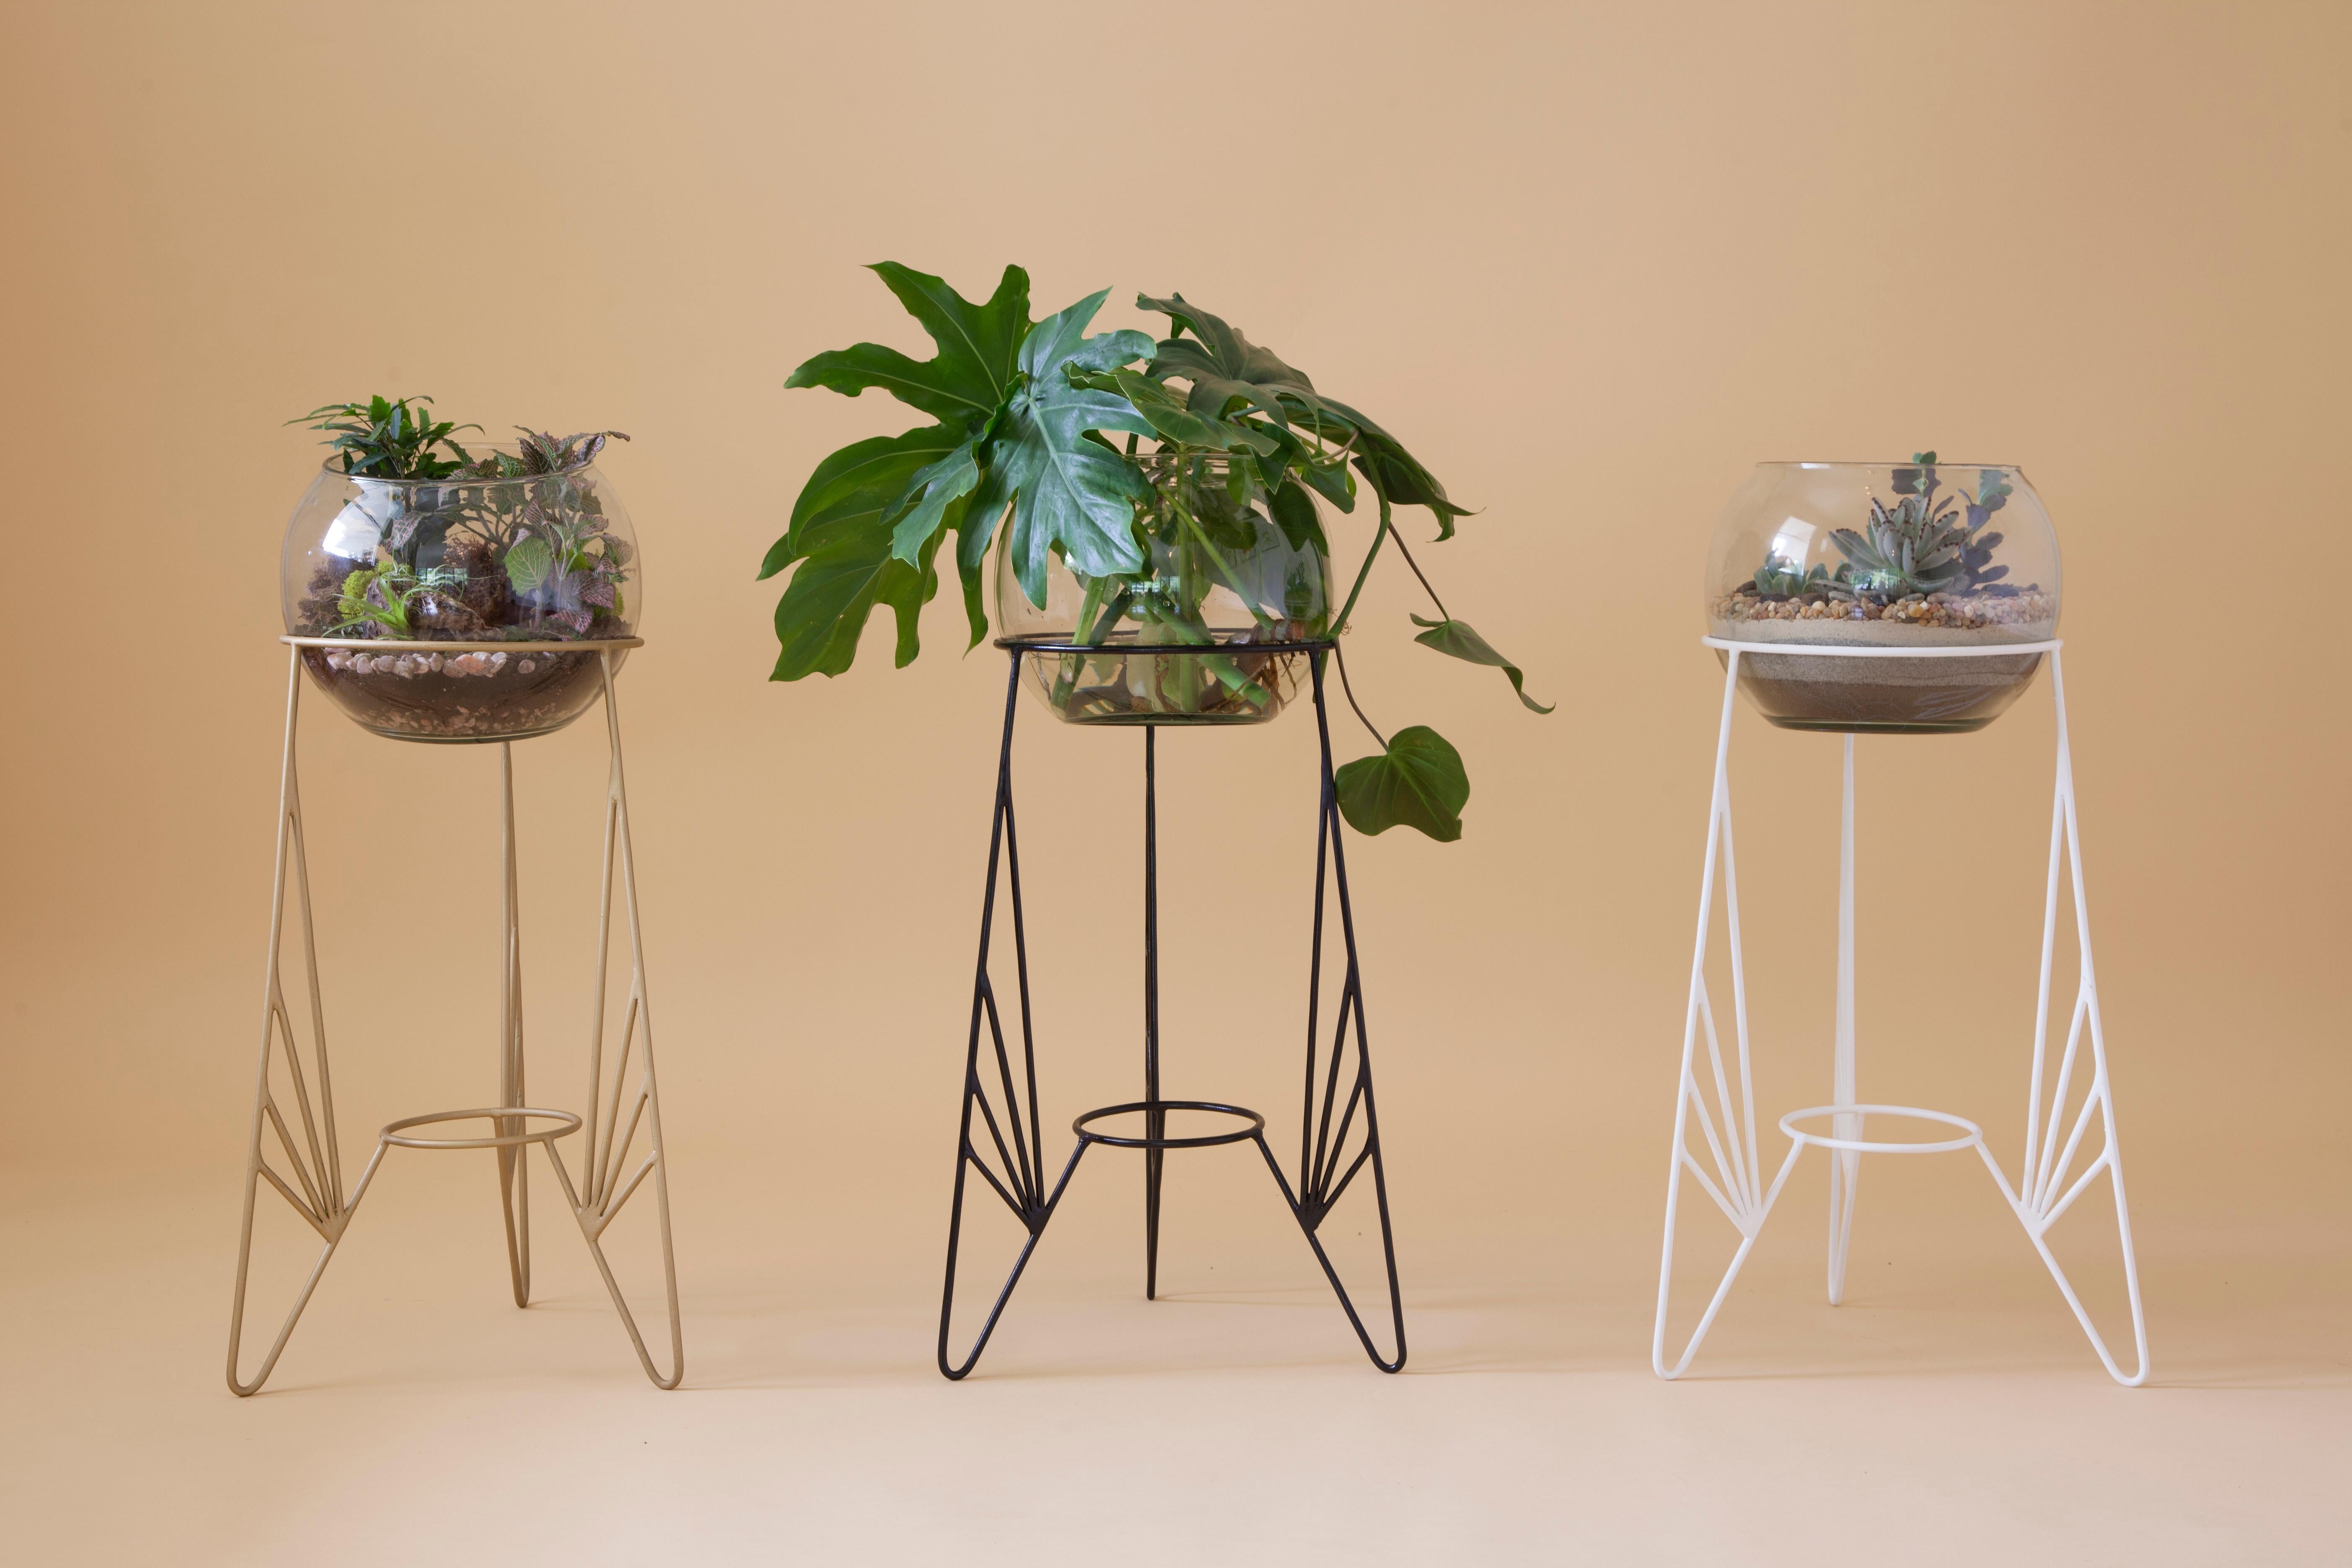 Set of 3 Aurea Plant Stand by Sofia Alvarado
Limited edition 1 of 10 (one in stock)
Materials: Metal and woods / golden, white or black.
include glass ball jar
Dimensions: H 70 x W 30 cm

FI is an ornamental artist who embodies the creative